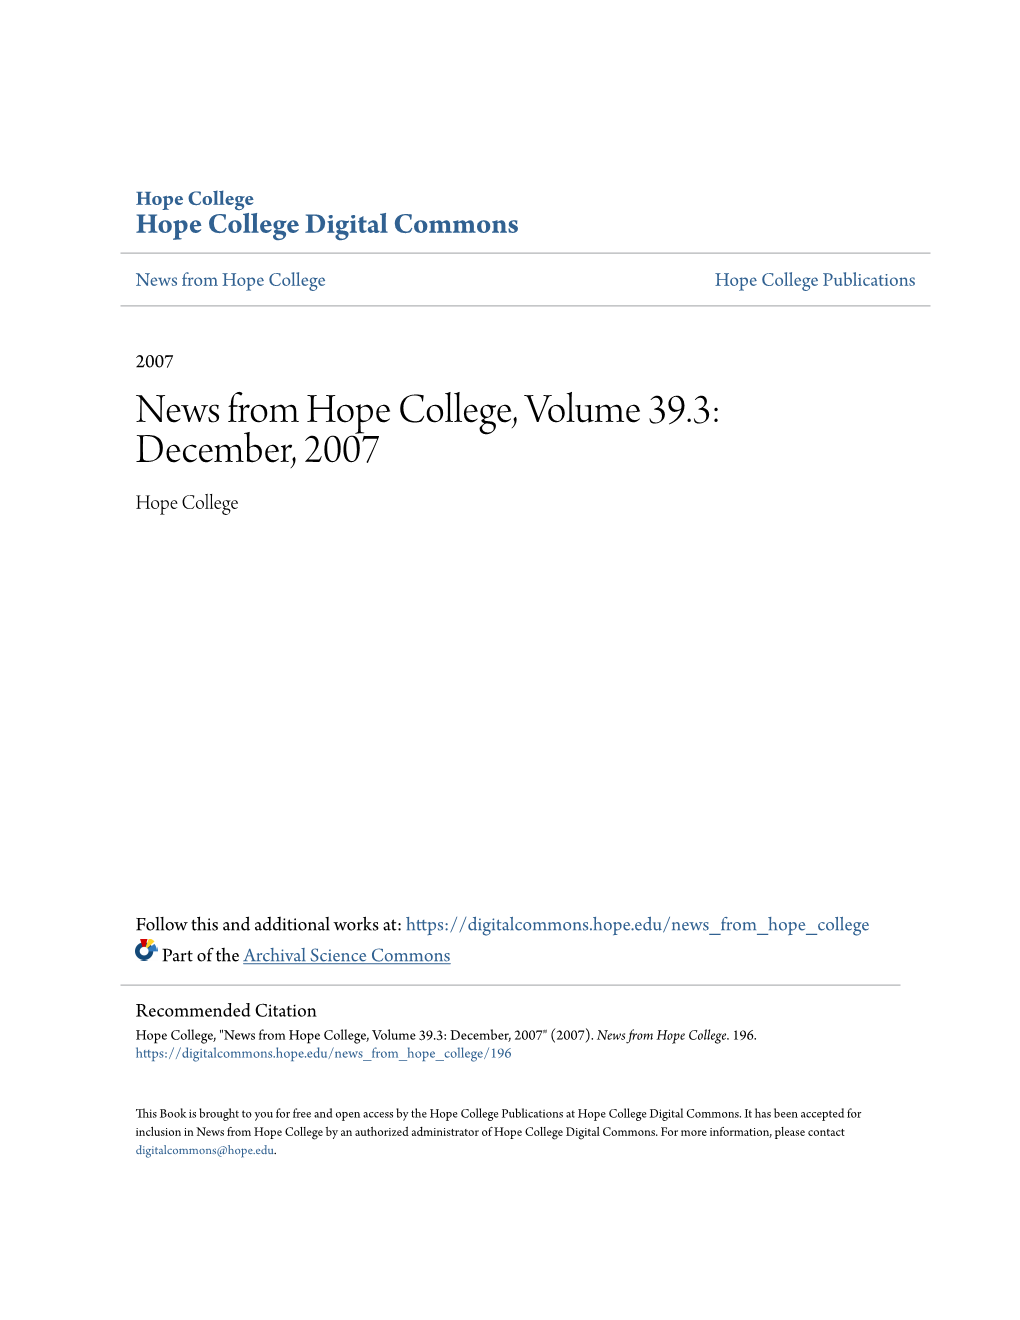 News from Hope College, Volume 39.3: December, 2007 Hope College